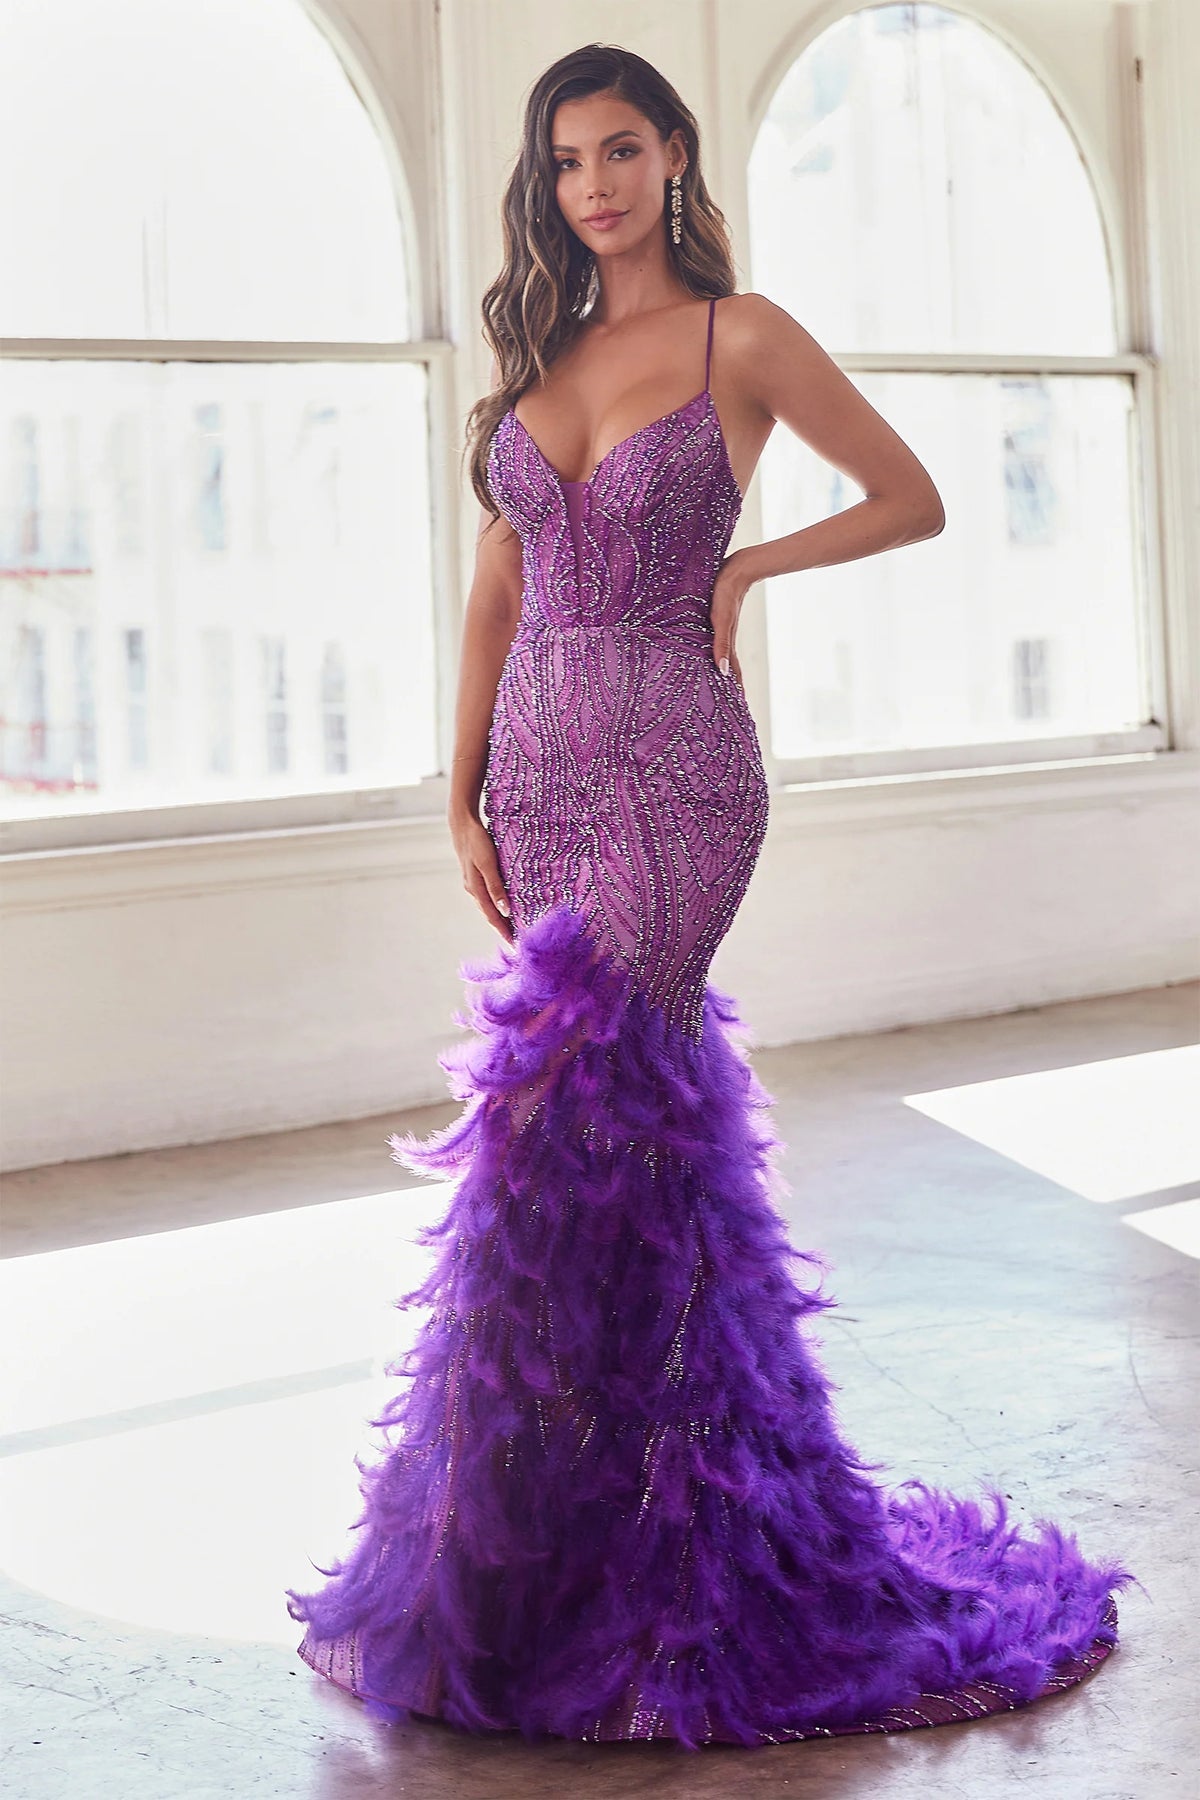 LaDivine CC2308 Enchanting Mermaid Prom Dress - A captivating mermaid silhouette dress with thin straps, v-neckline, glitter and bead embellishments on the sheer boned bodice, a tiered feathered skirt, and an open lace-up corset back.  The model is wearing the dress in Nova Purple.